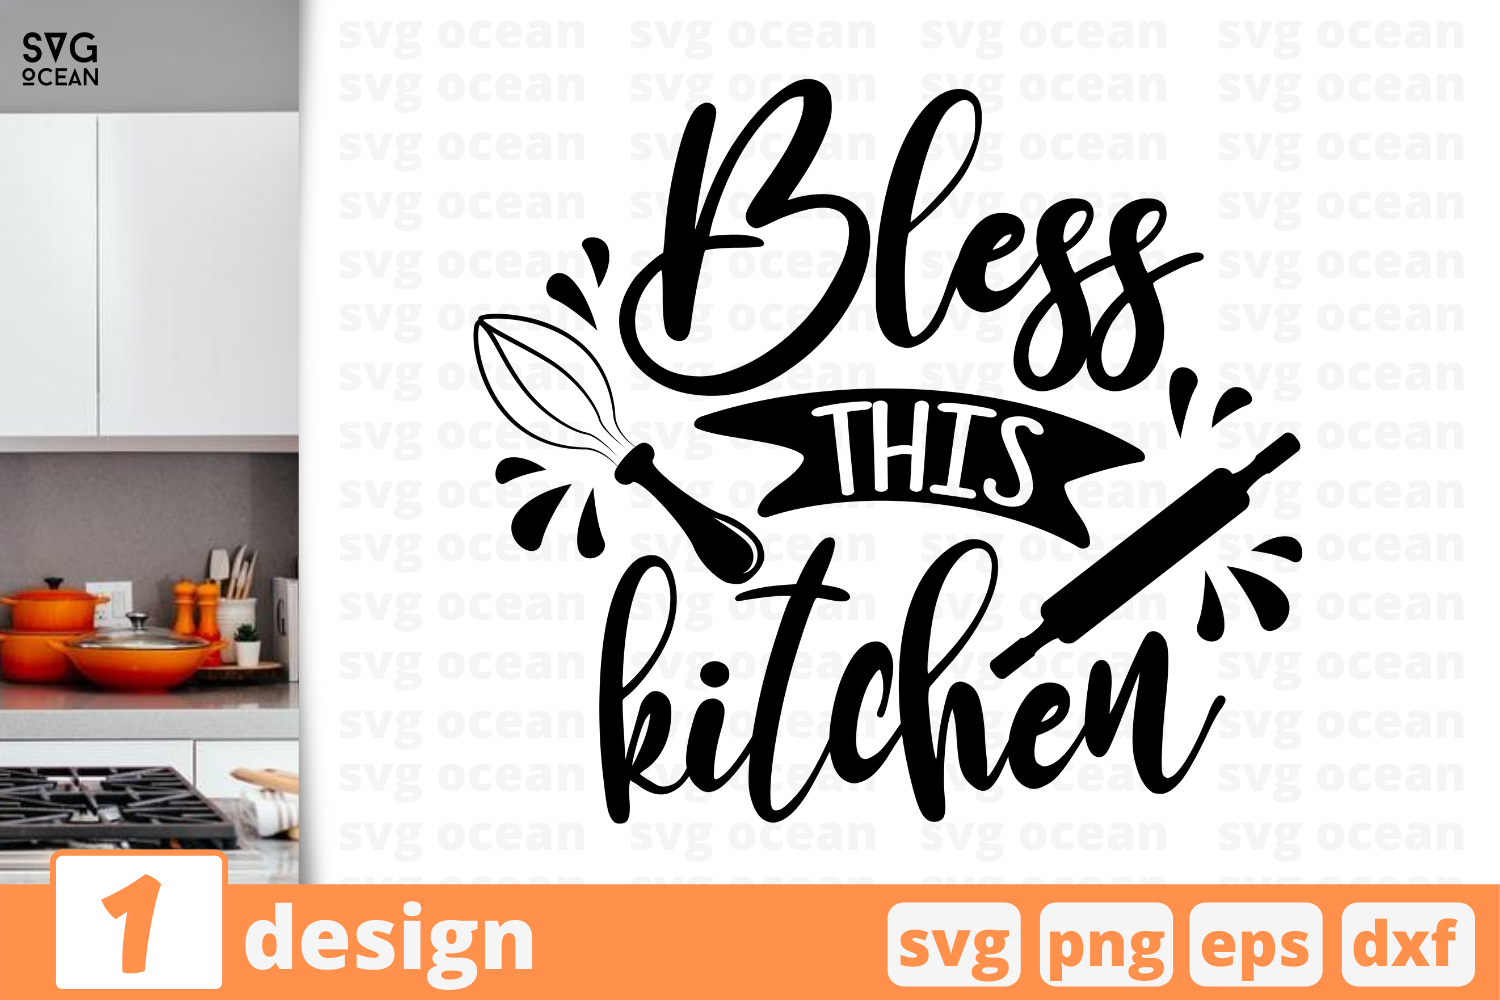 Download 1 Bless this kitchen, Kitchen quotes cricut svg By SvgOcean | TheHungryJPEG.com